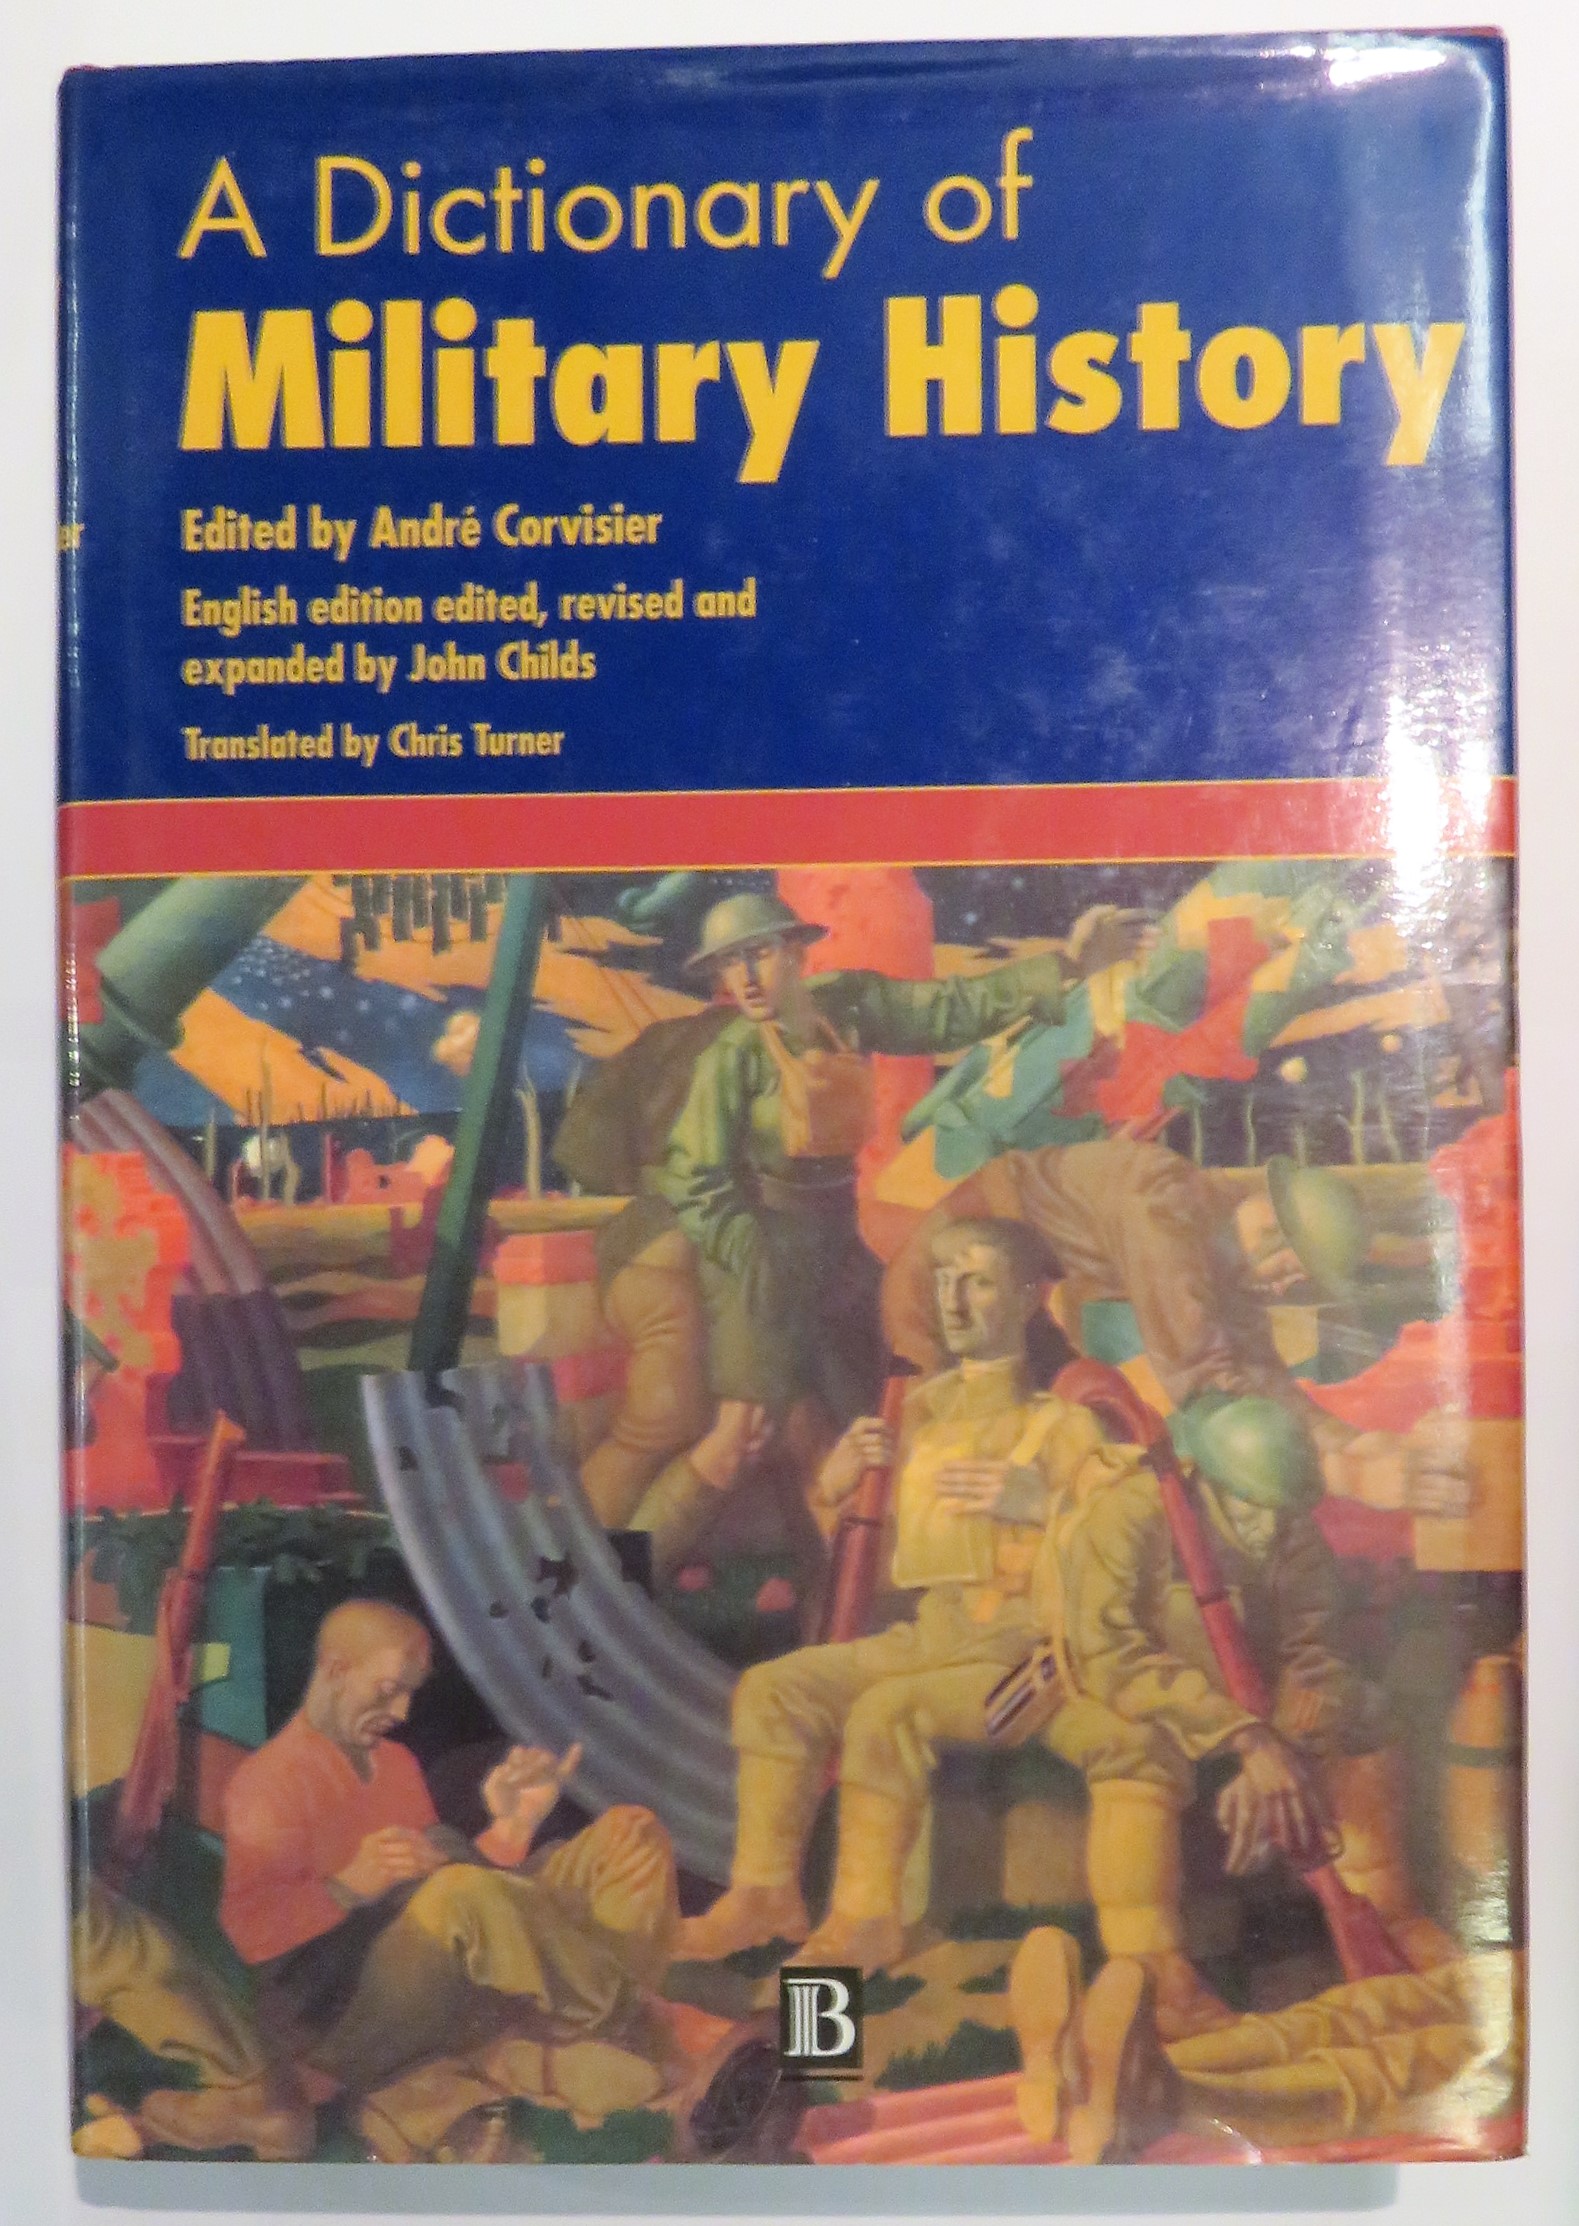 A Dictionary of Military History